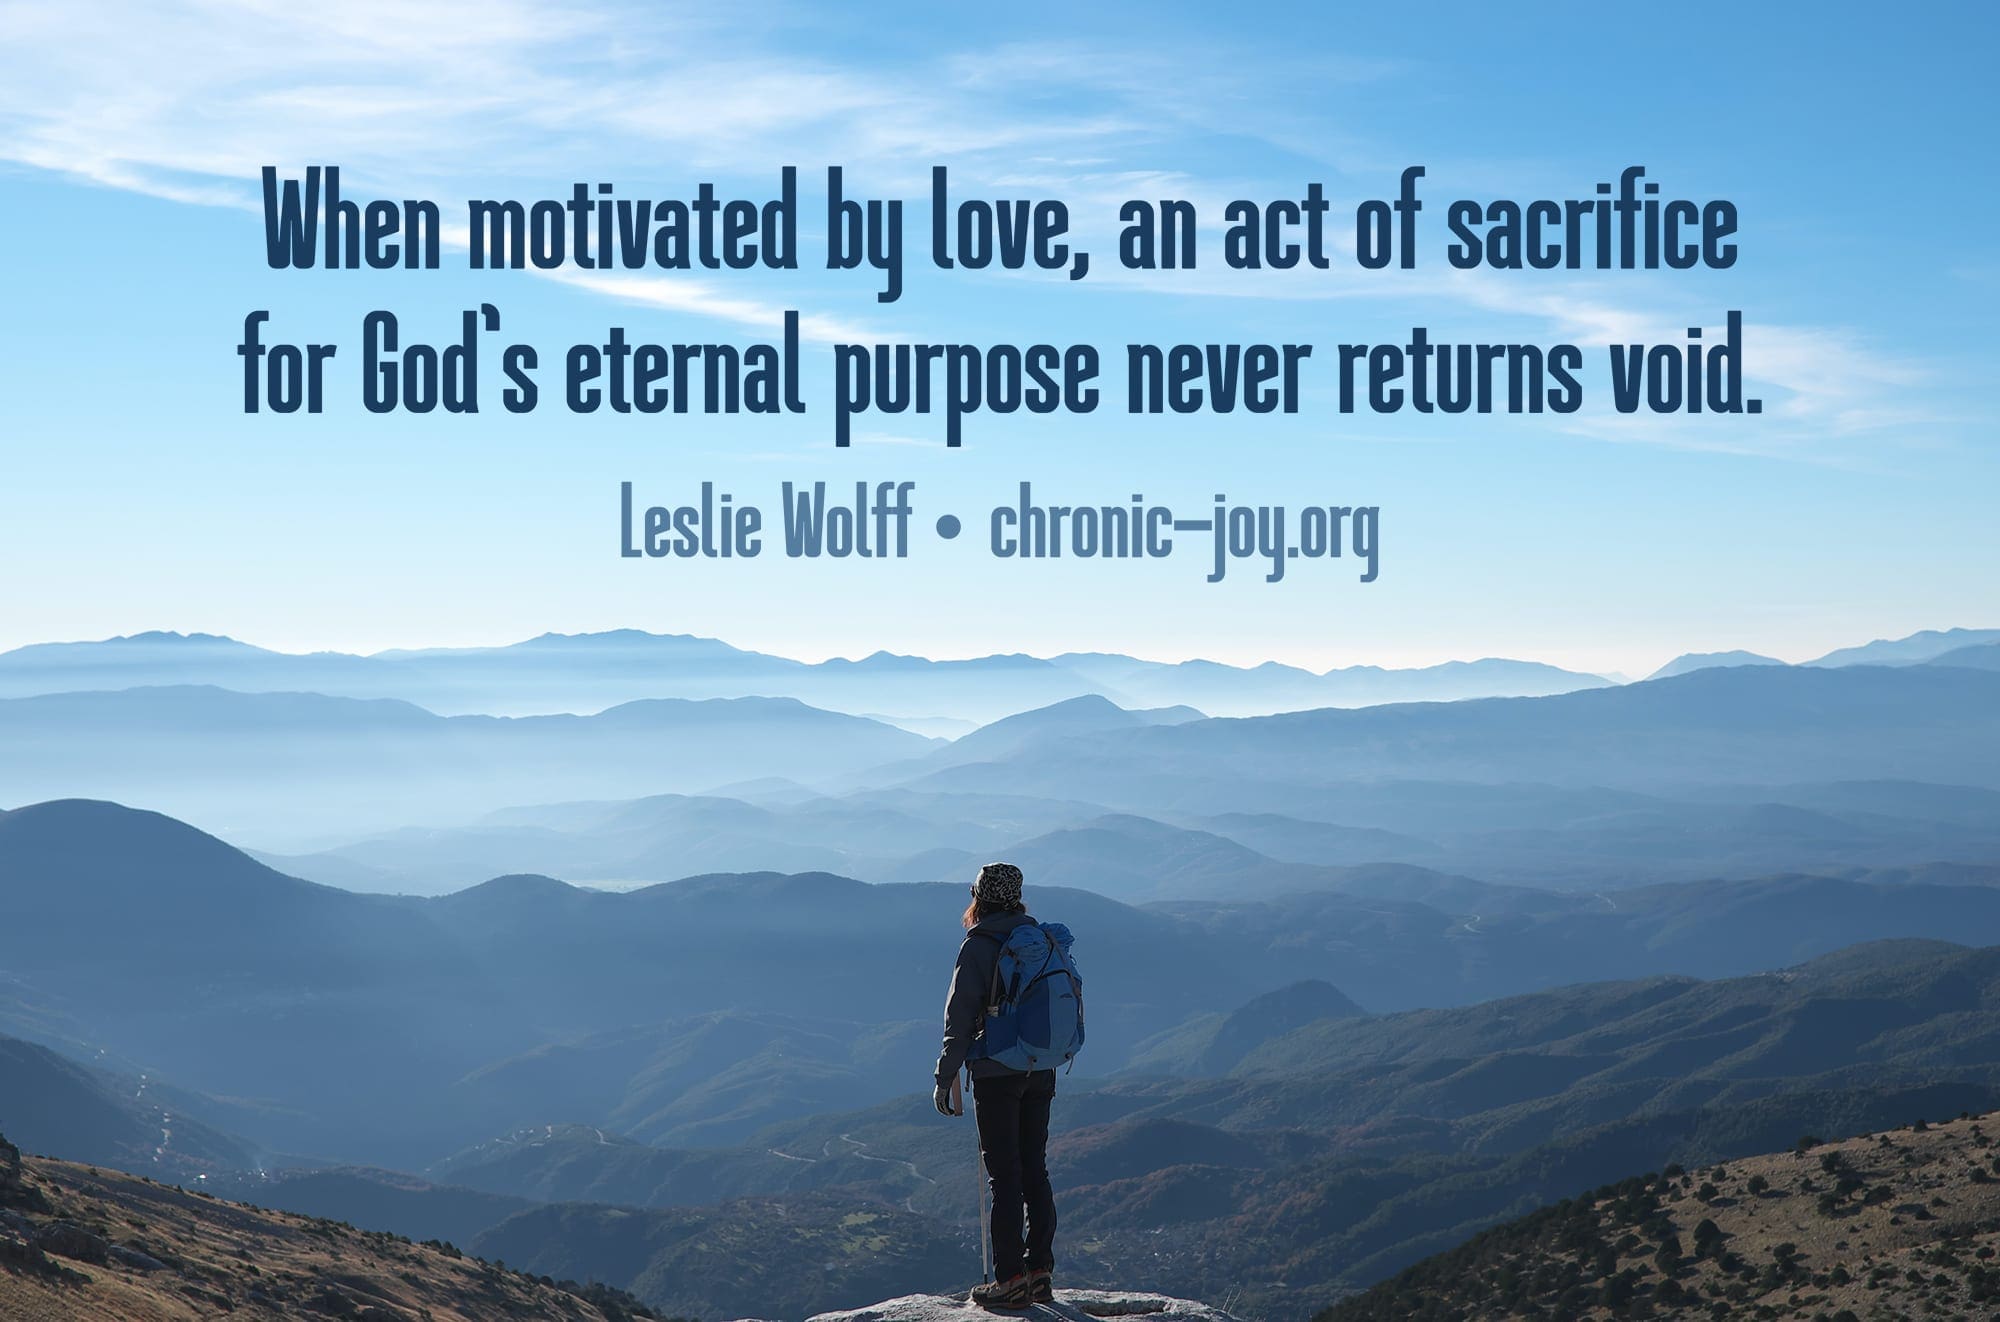 "When motivated by love, an act of sacrifice for God’s eternal purpose never returns void." Leslie Wolff